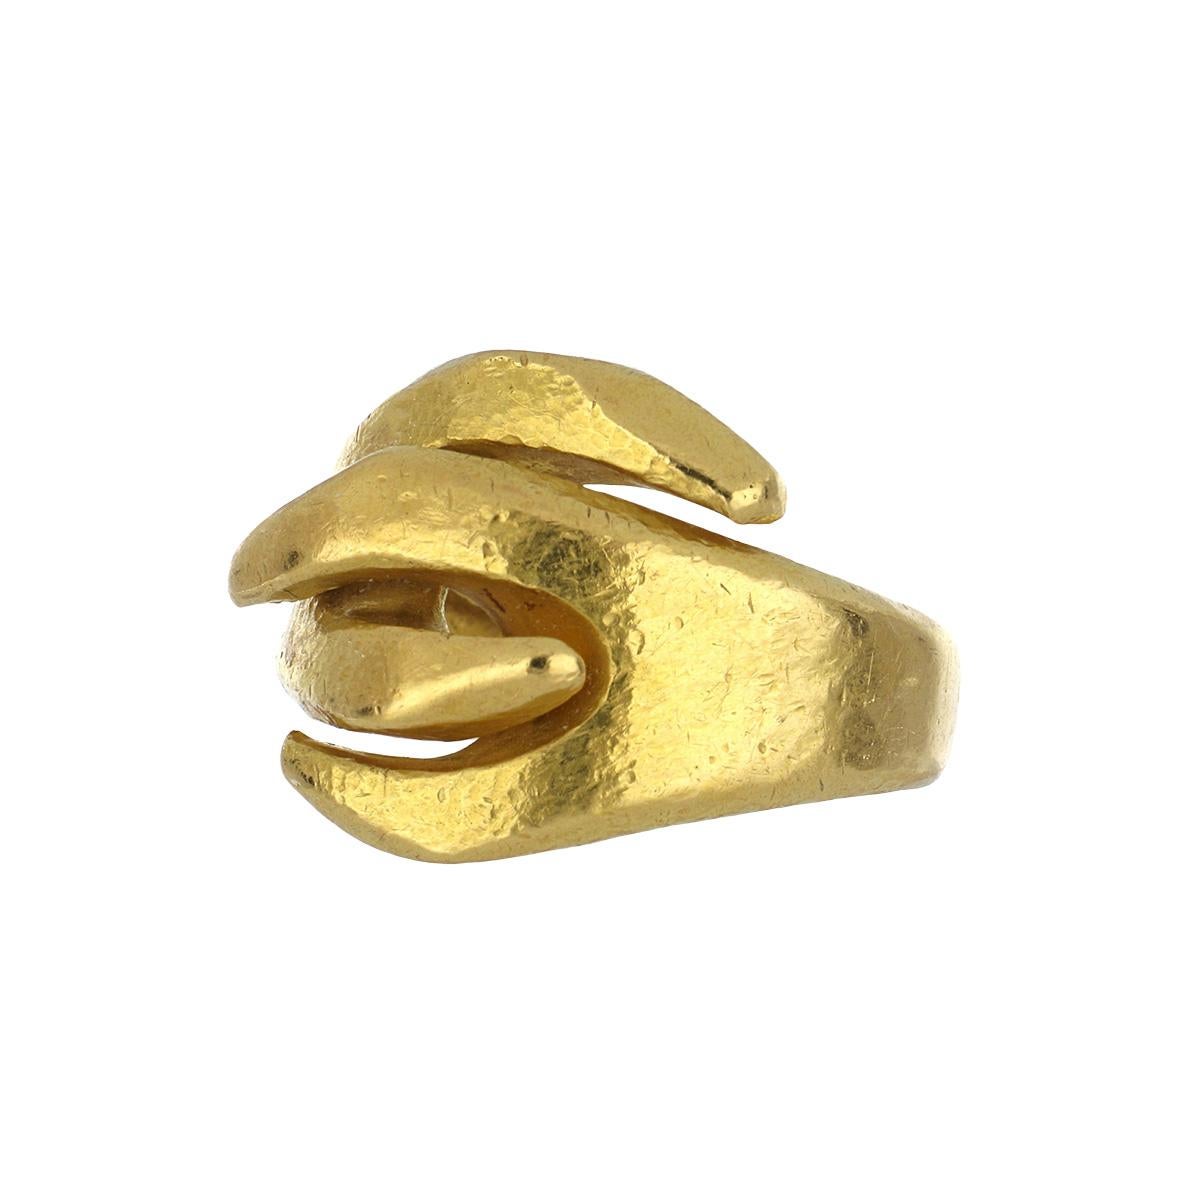 Ilias Lalaounis textured 22K yellow gold ring.  Lalaounis maker's mark.  The ring is a size 5 1/2.
